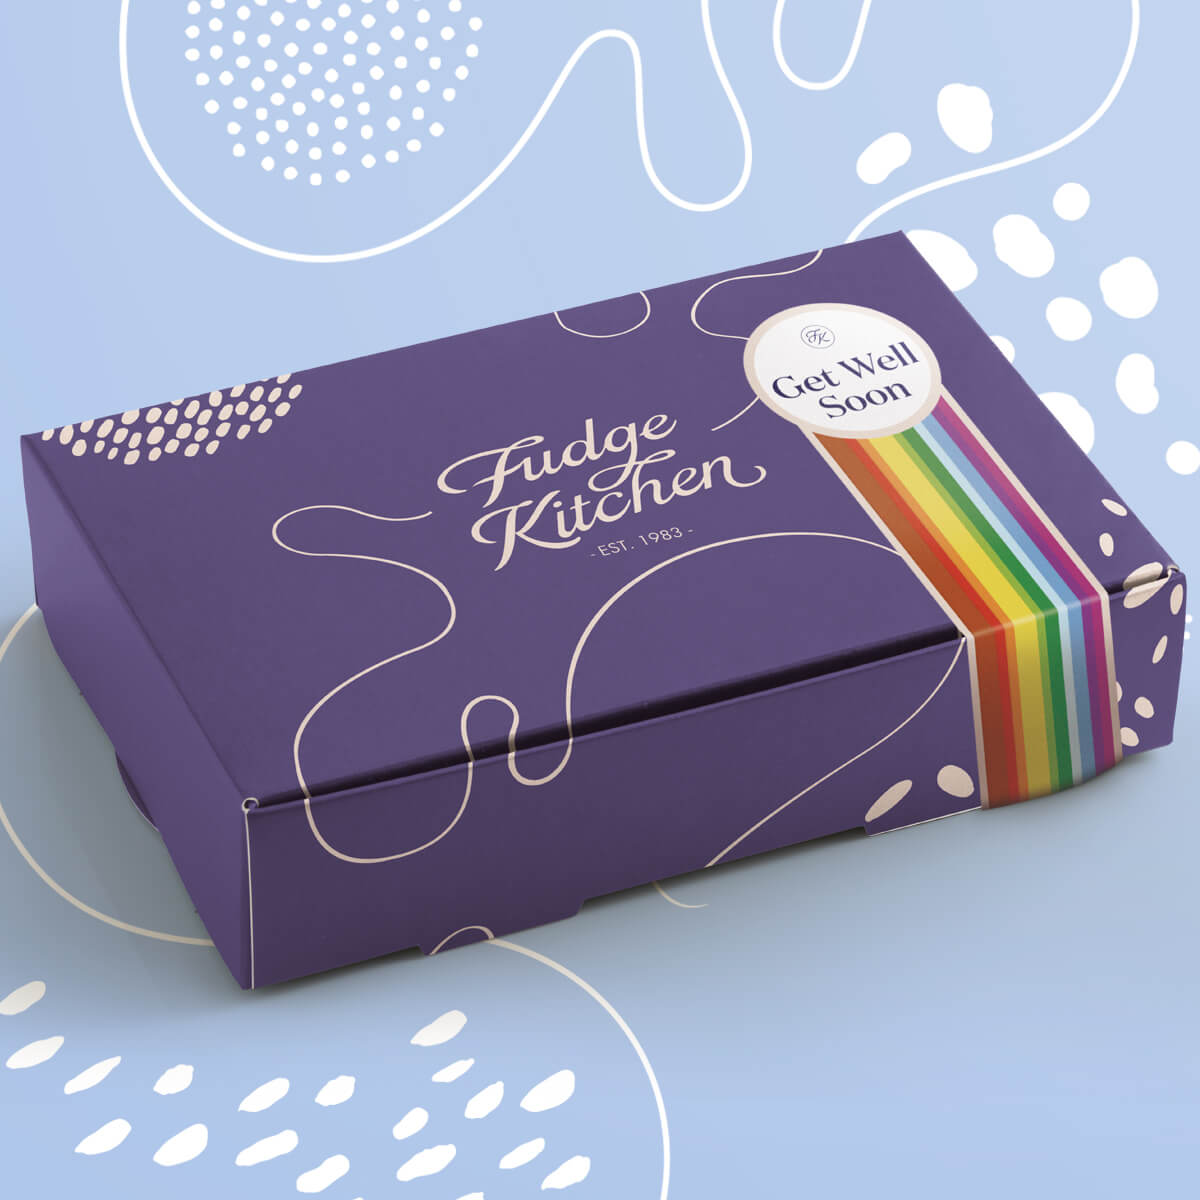 Butter fudge gift box with 'get well soon' band